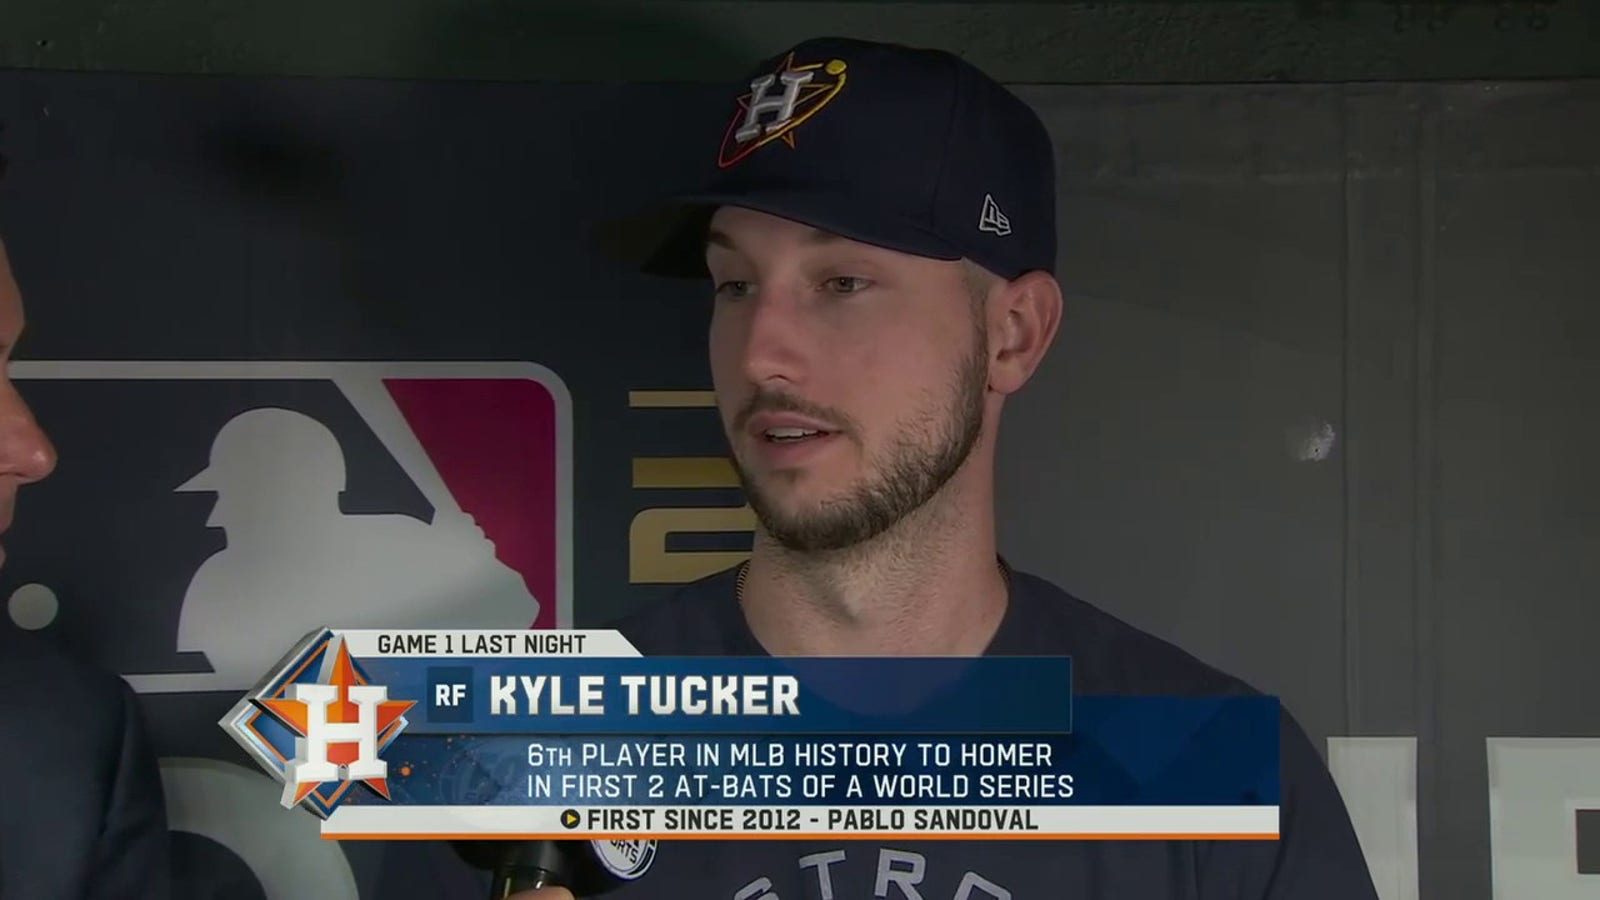 Kyle Tucker reflects on his World Series Game 1 multi-HR game